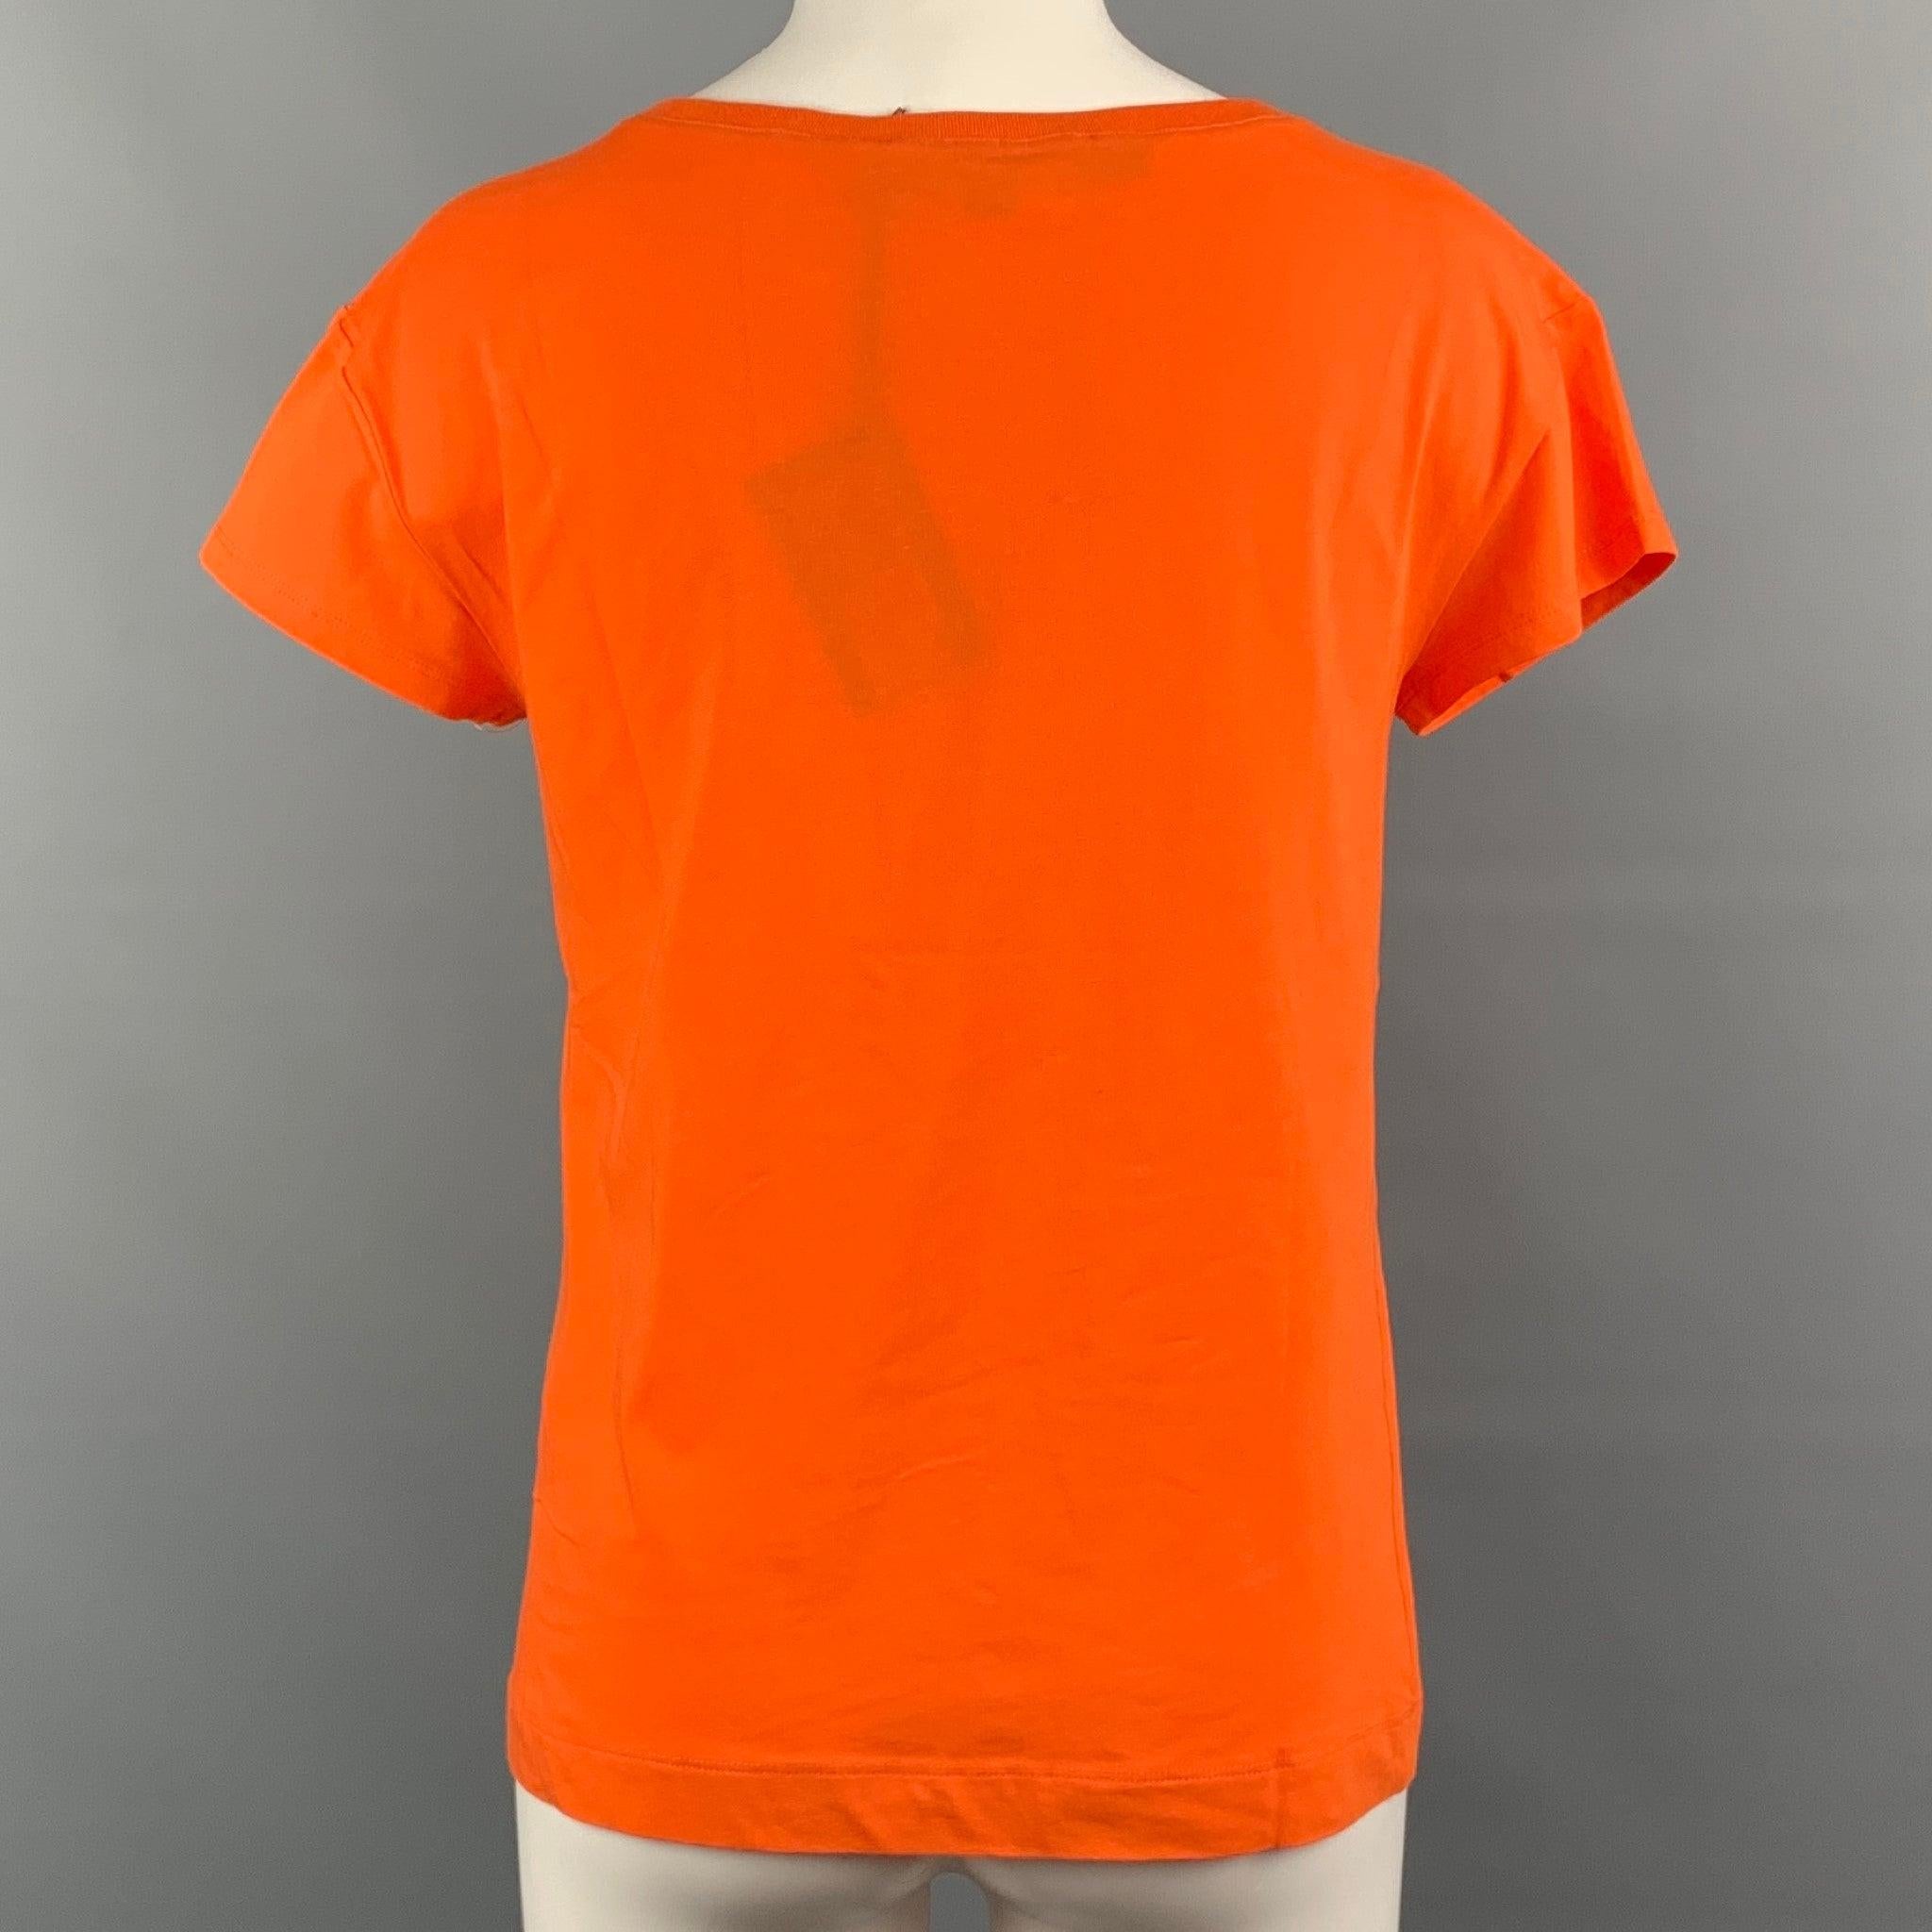 LOVE MOSCHINO Size 4 Orange Floral Graphic Cotton T-Shirt In Excellent Condition For Sale In San Francisco, CA